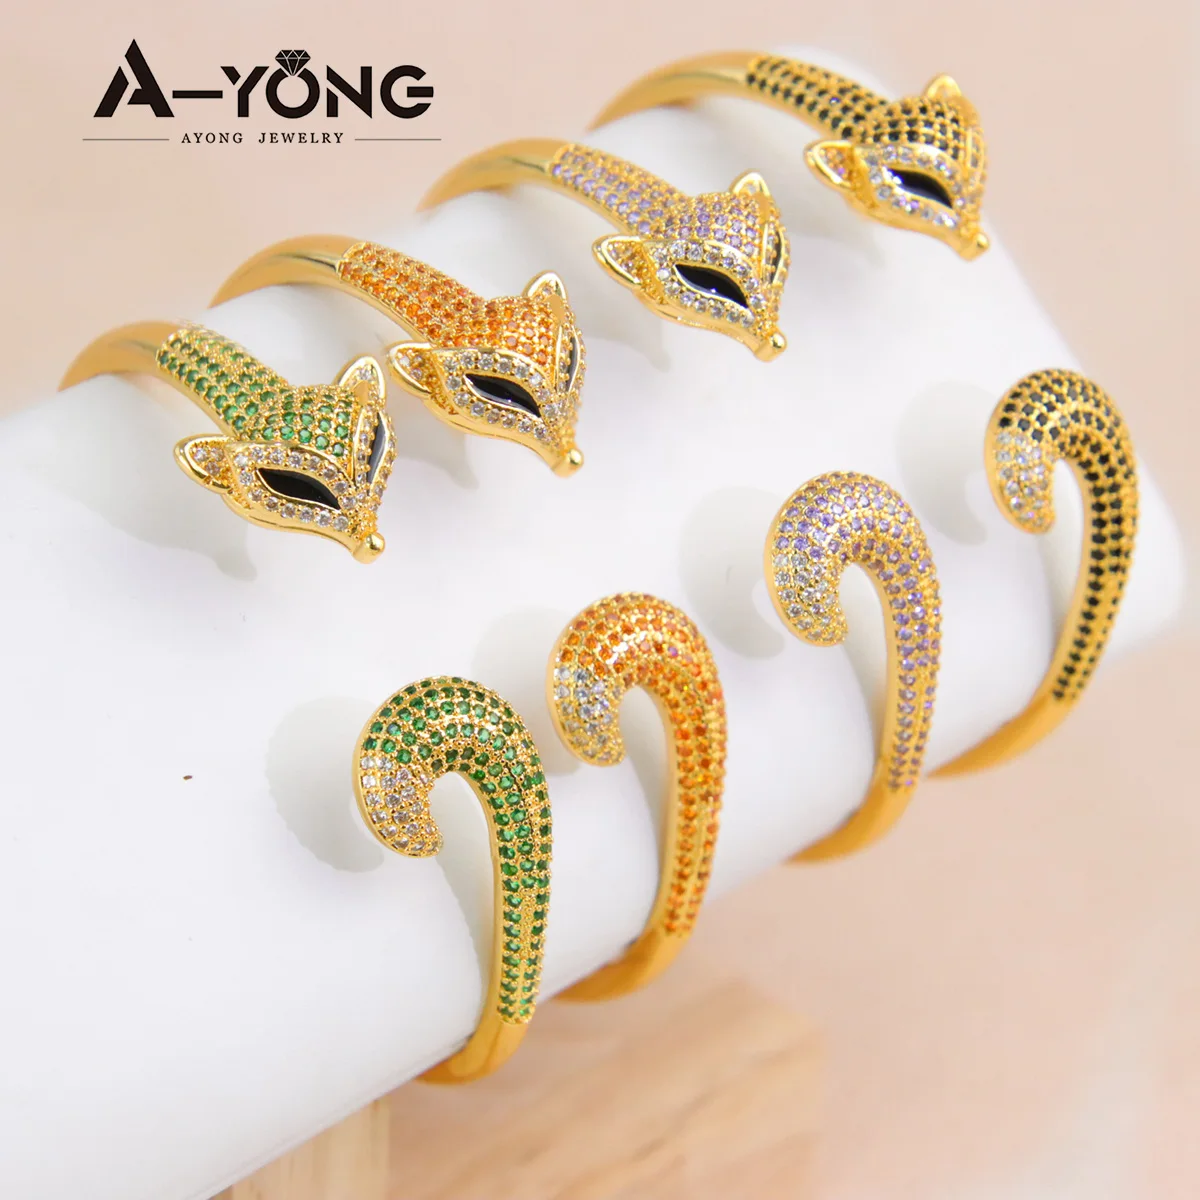 

Ayong Jewelry Brass Fox Cubic Zirconia Adjustable Bangle Bracelet Women's Gold Plated Bangles